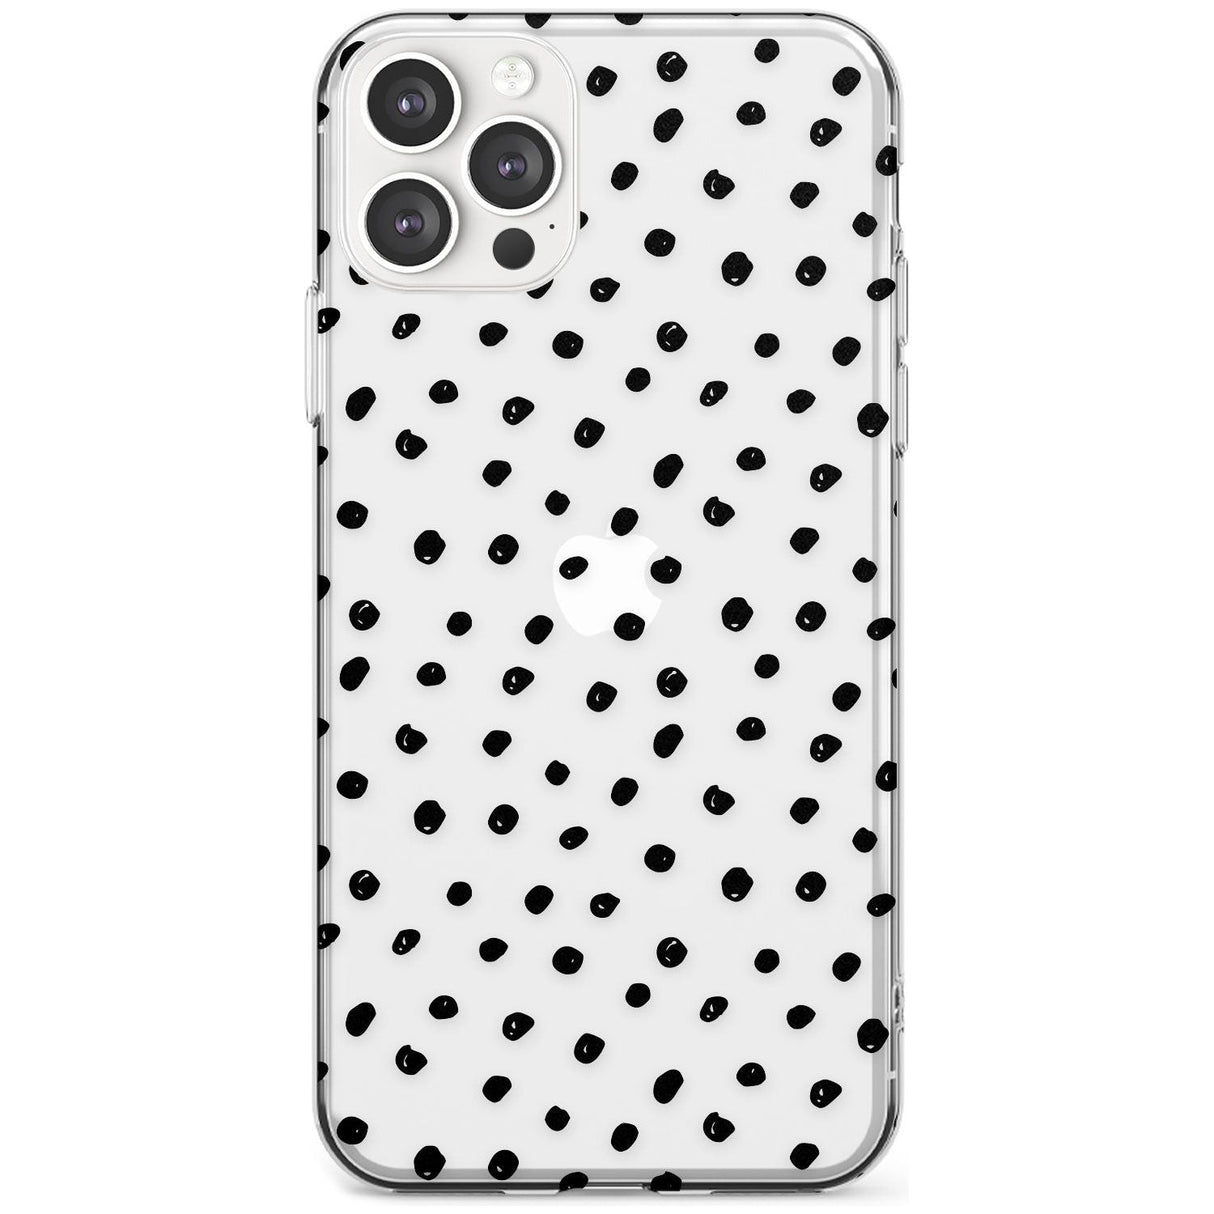 Messy Black Dot Pattern Black Impact Phone Case for iPhone 11 Pro Max